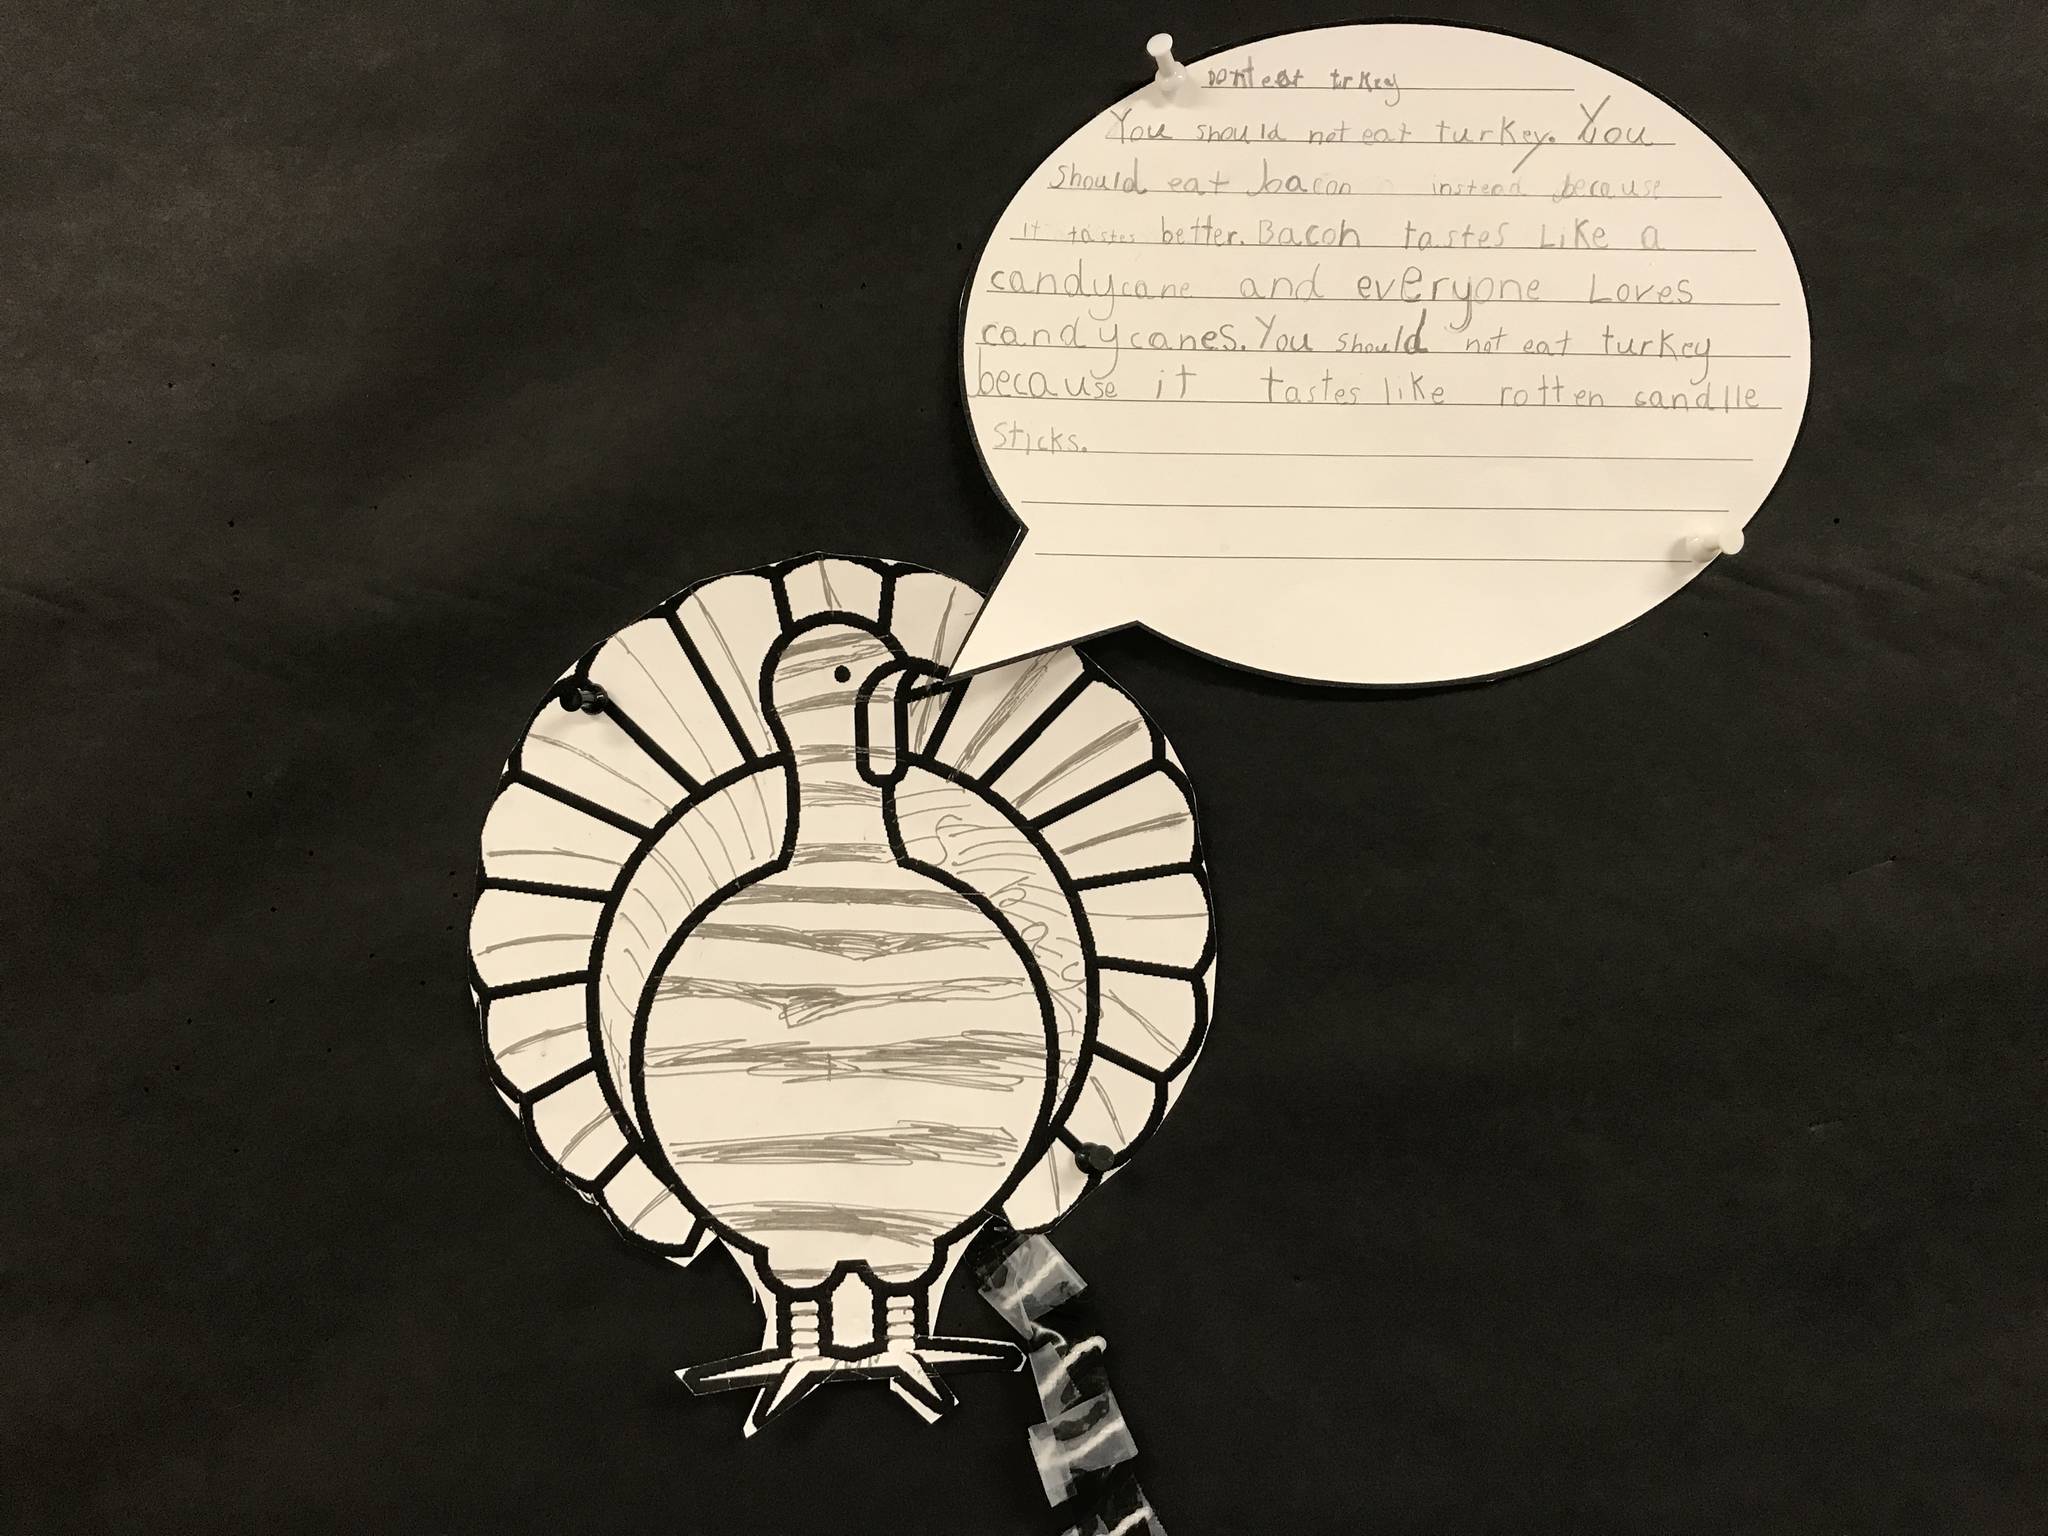 Paul Banks Elementary second graders get festive with turkey project